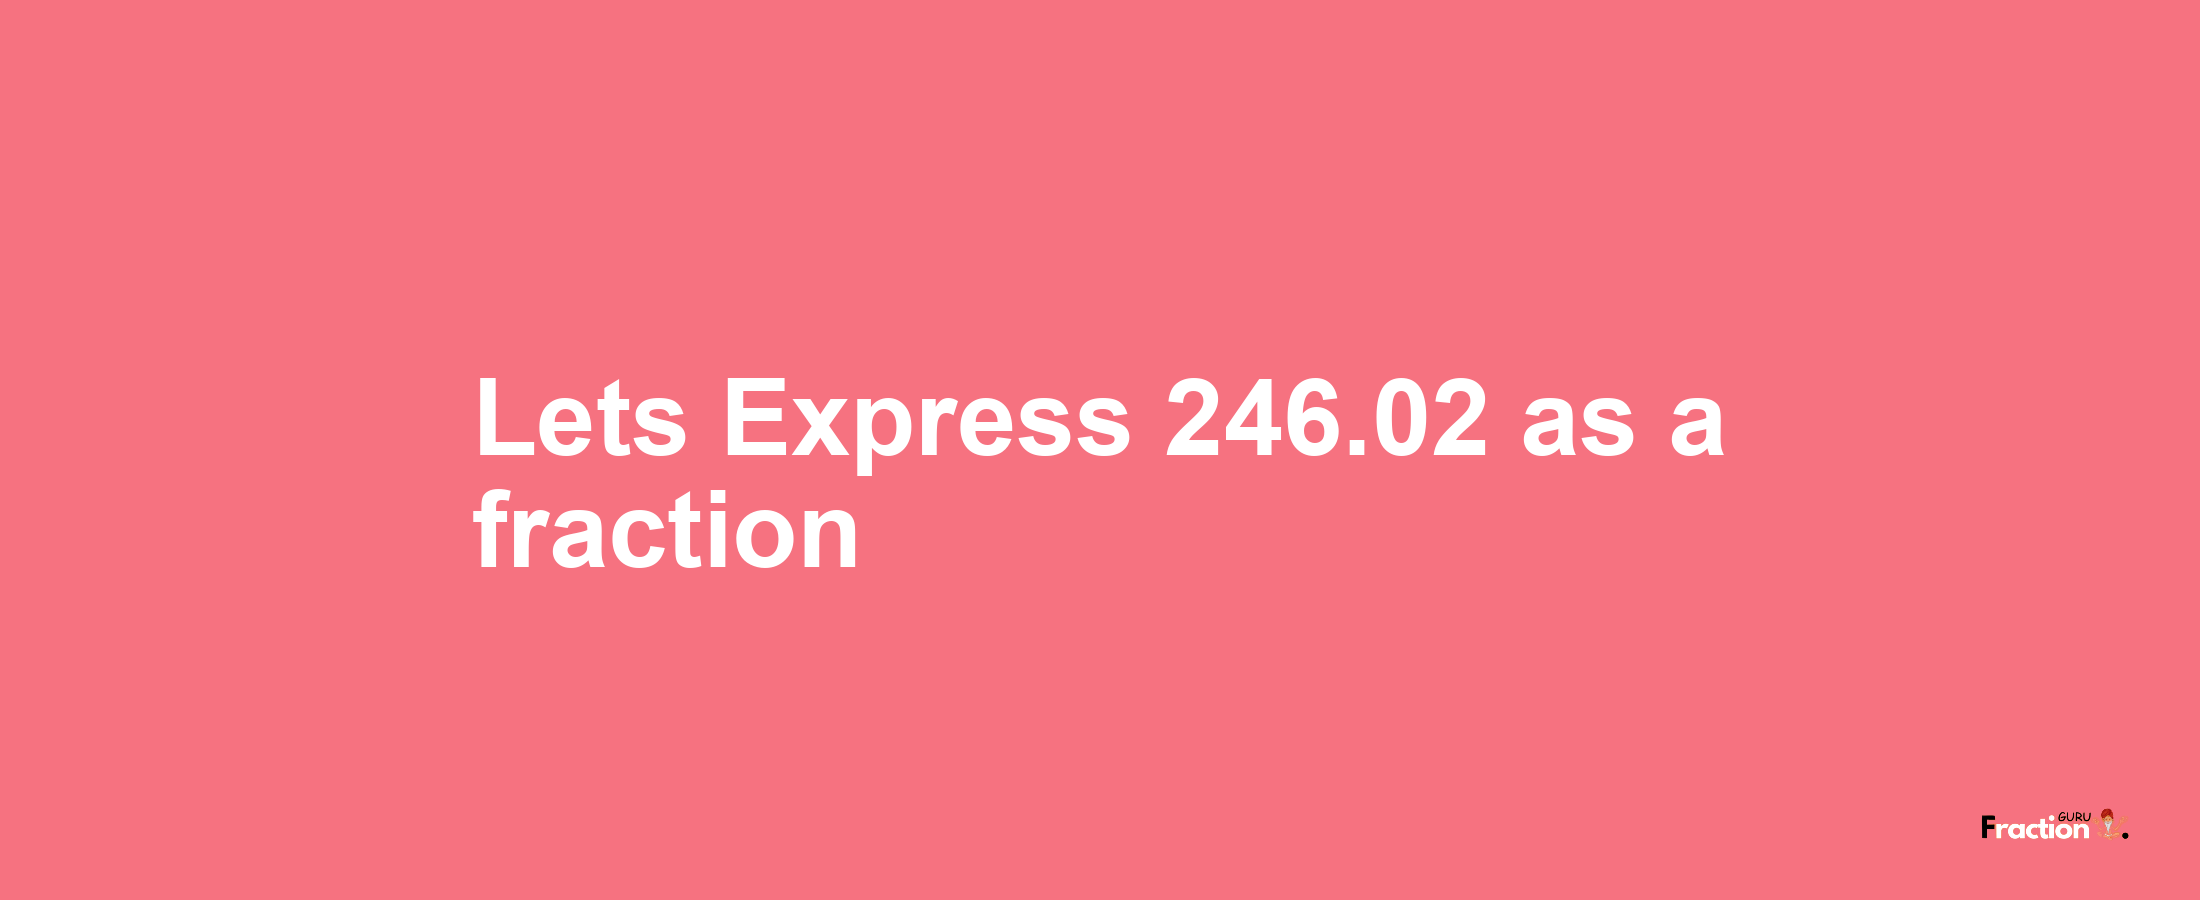 Lets Express 246.02 as afraction